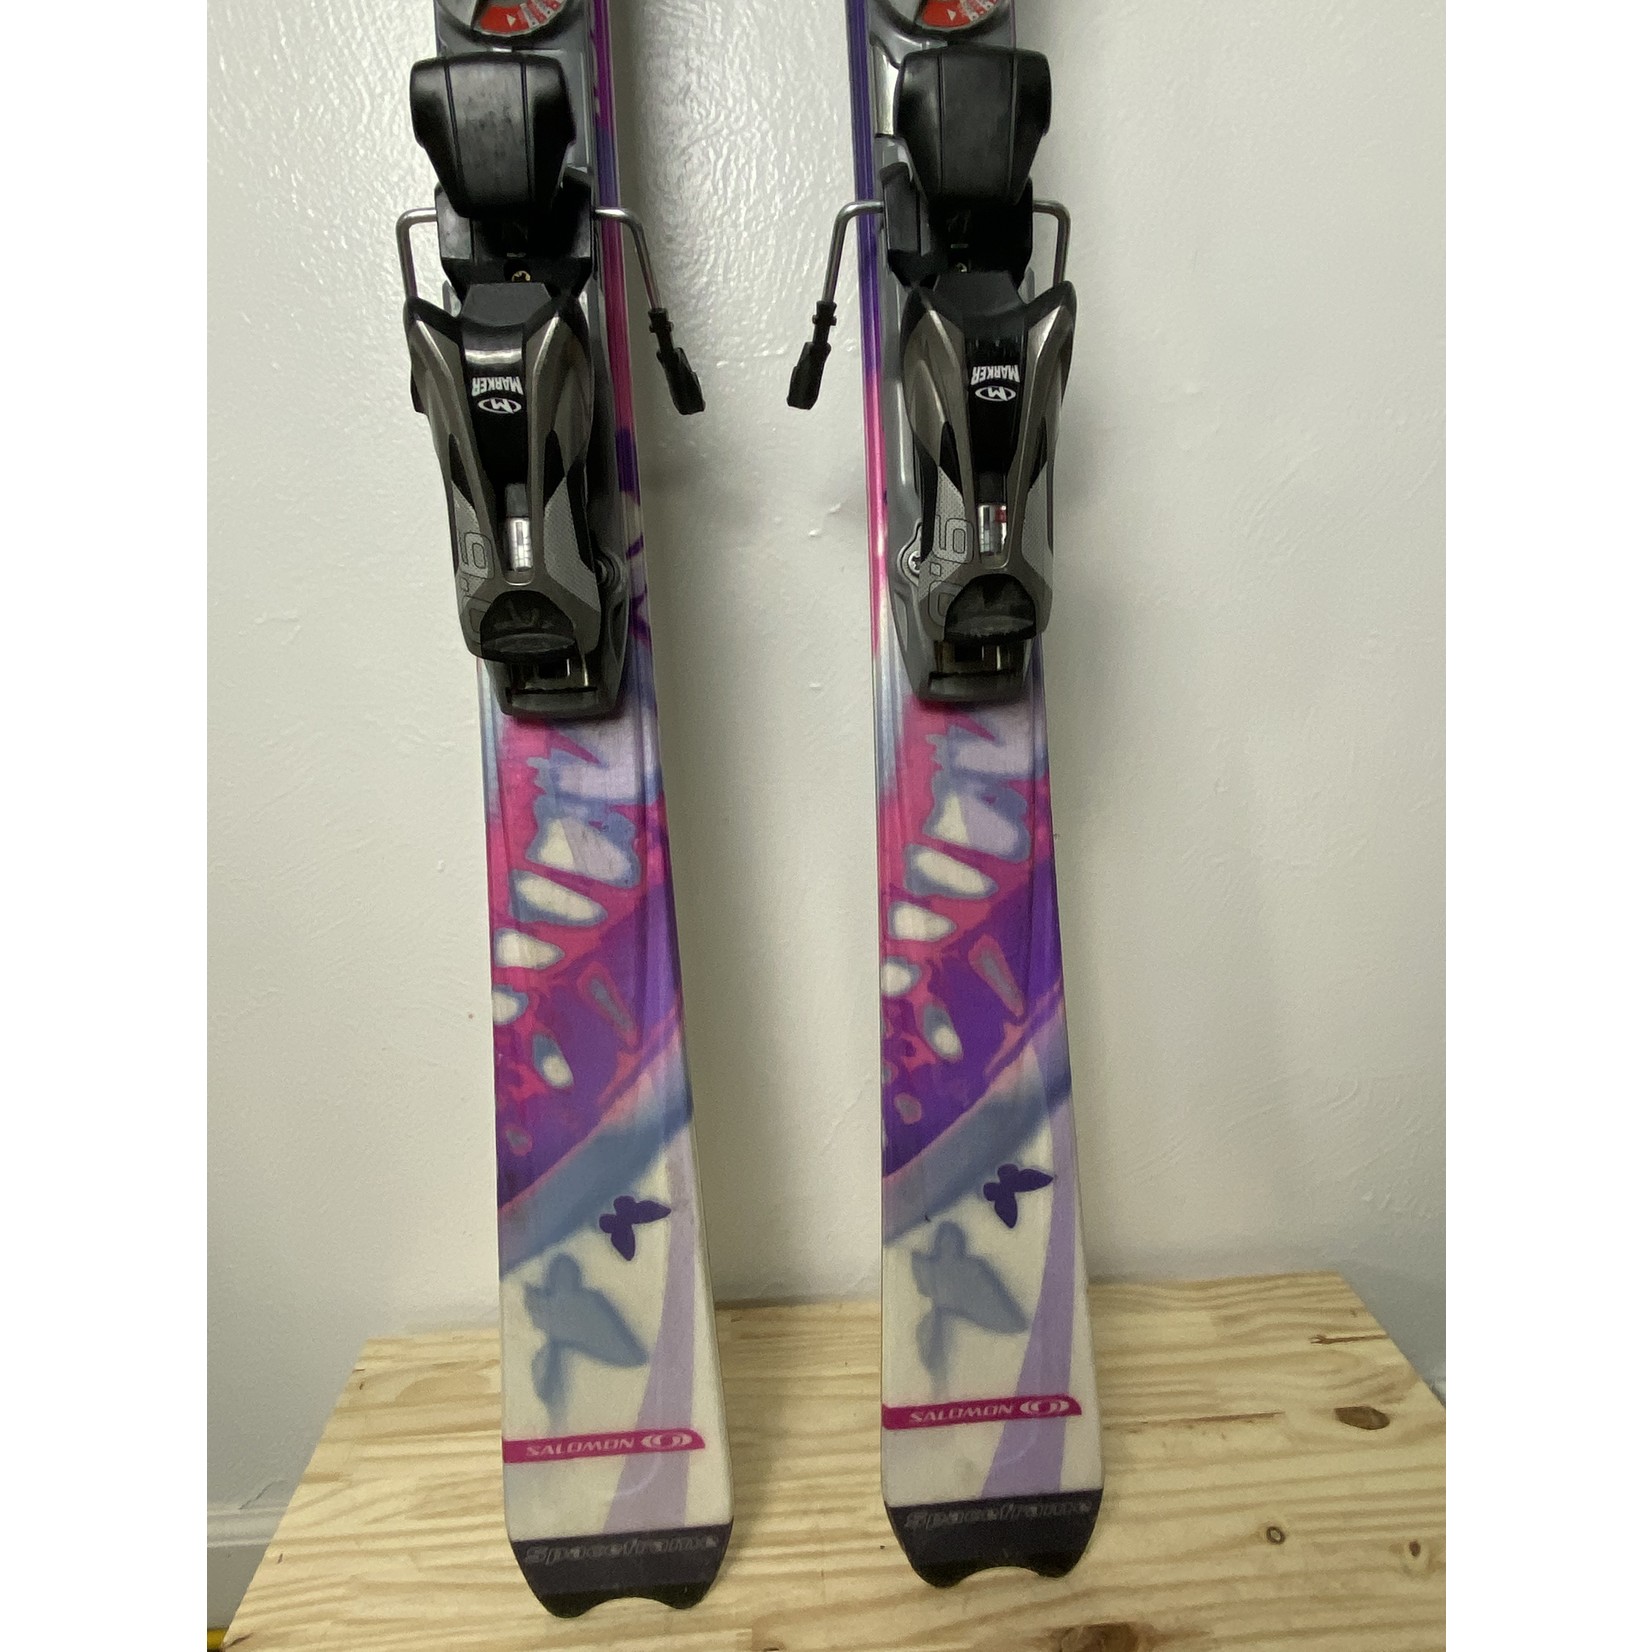 Salomon Siam 400 + Marker 9.0 SpeedPoint Demo Bindings - Snowsports Outlet powered by Rocky Ski &